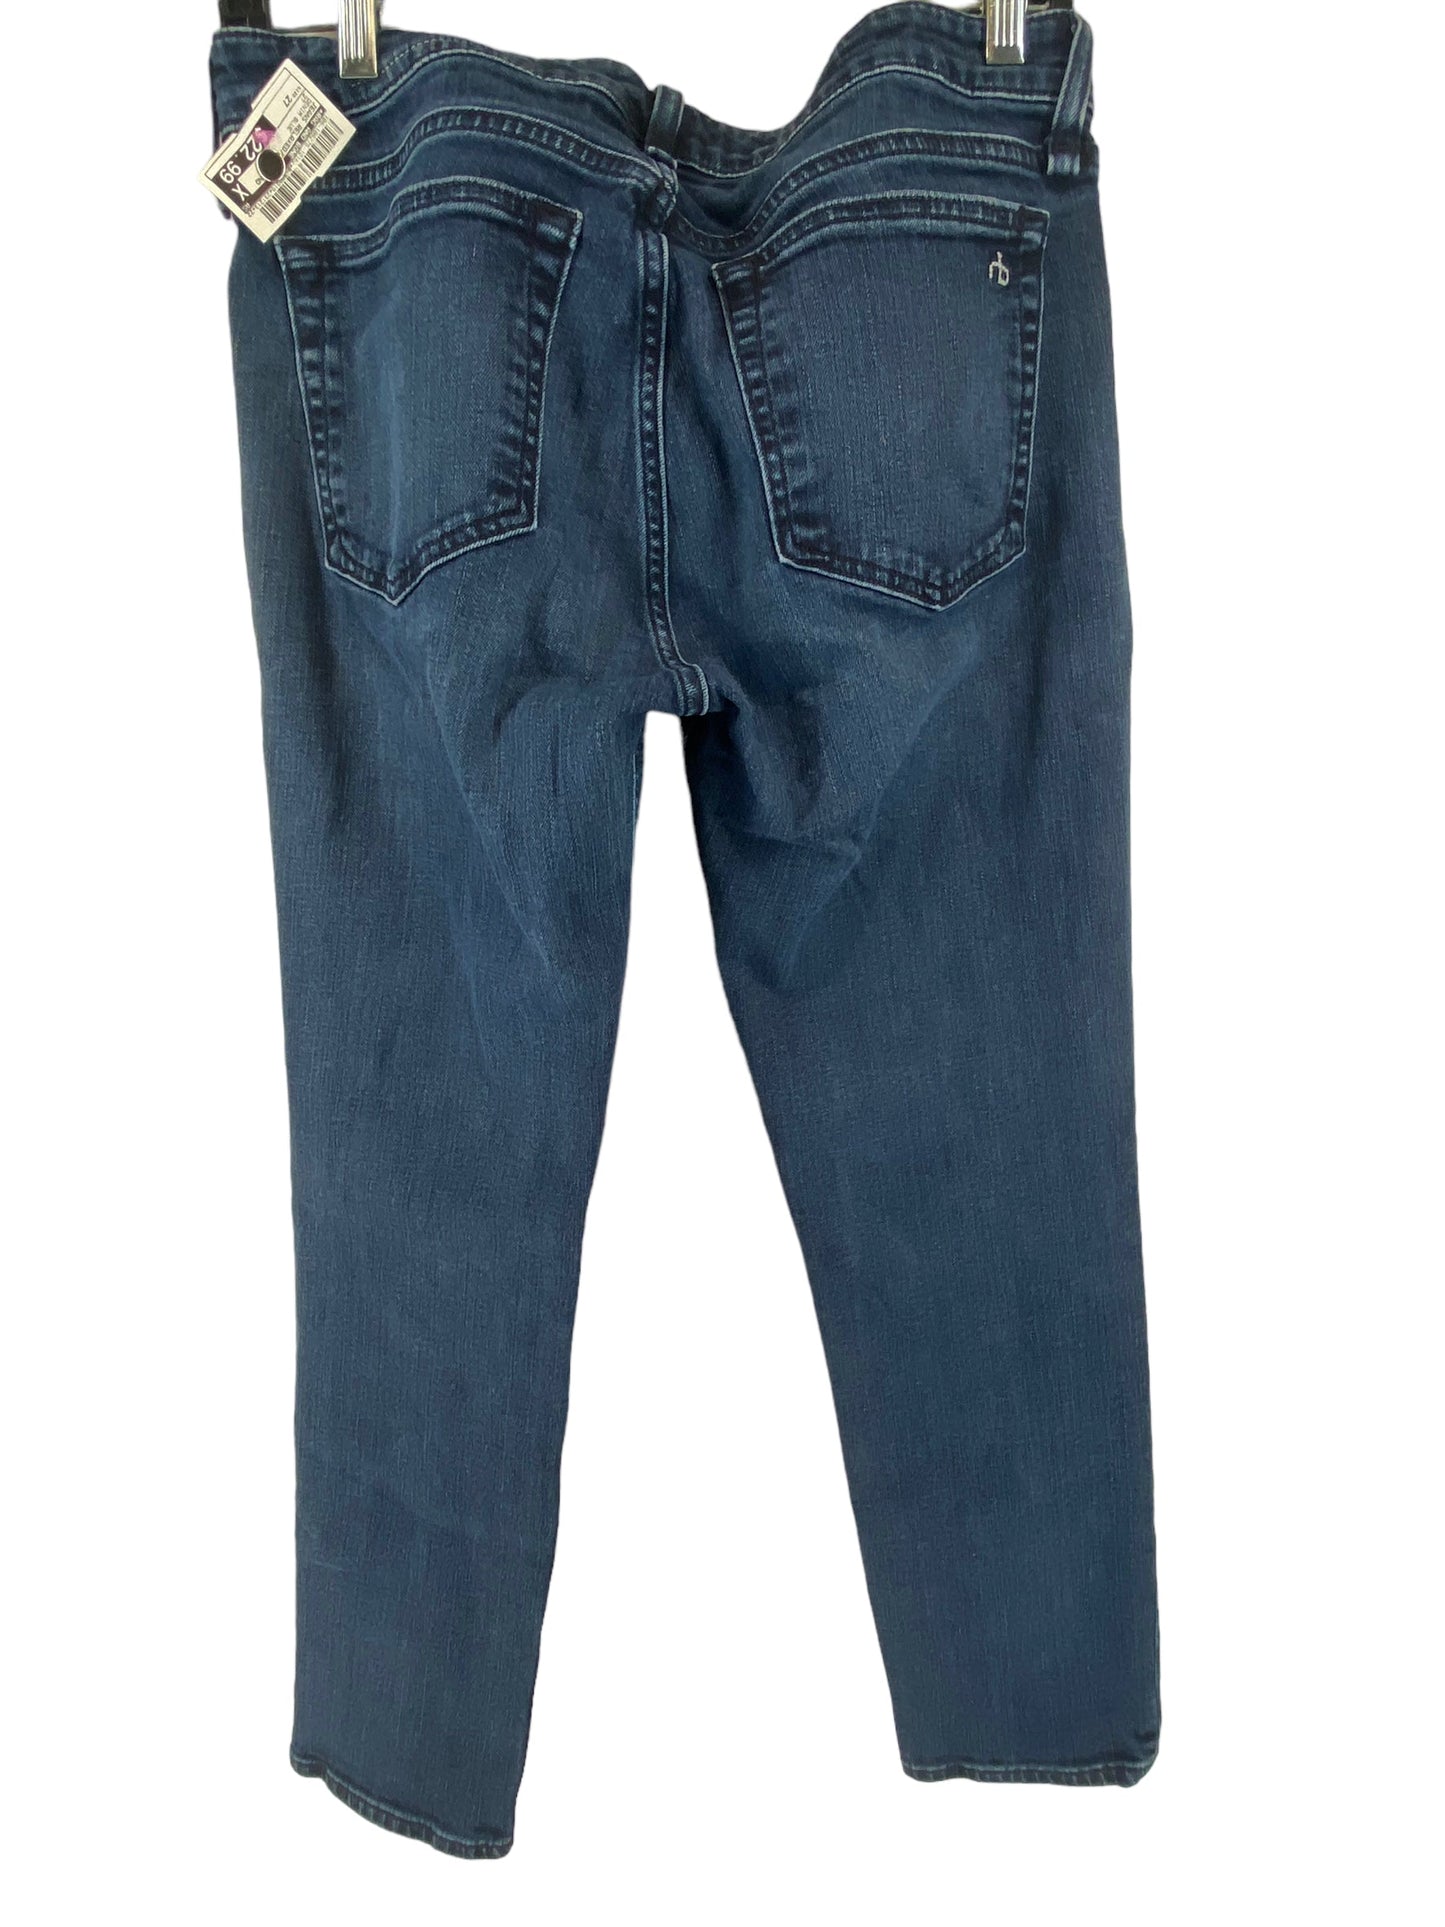 Jeans Relaxed/boyfriend By Rag And Bone  Size: 27